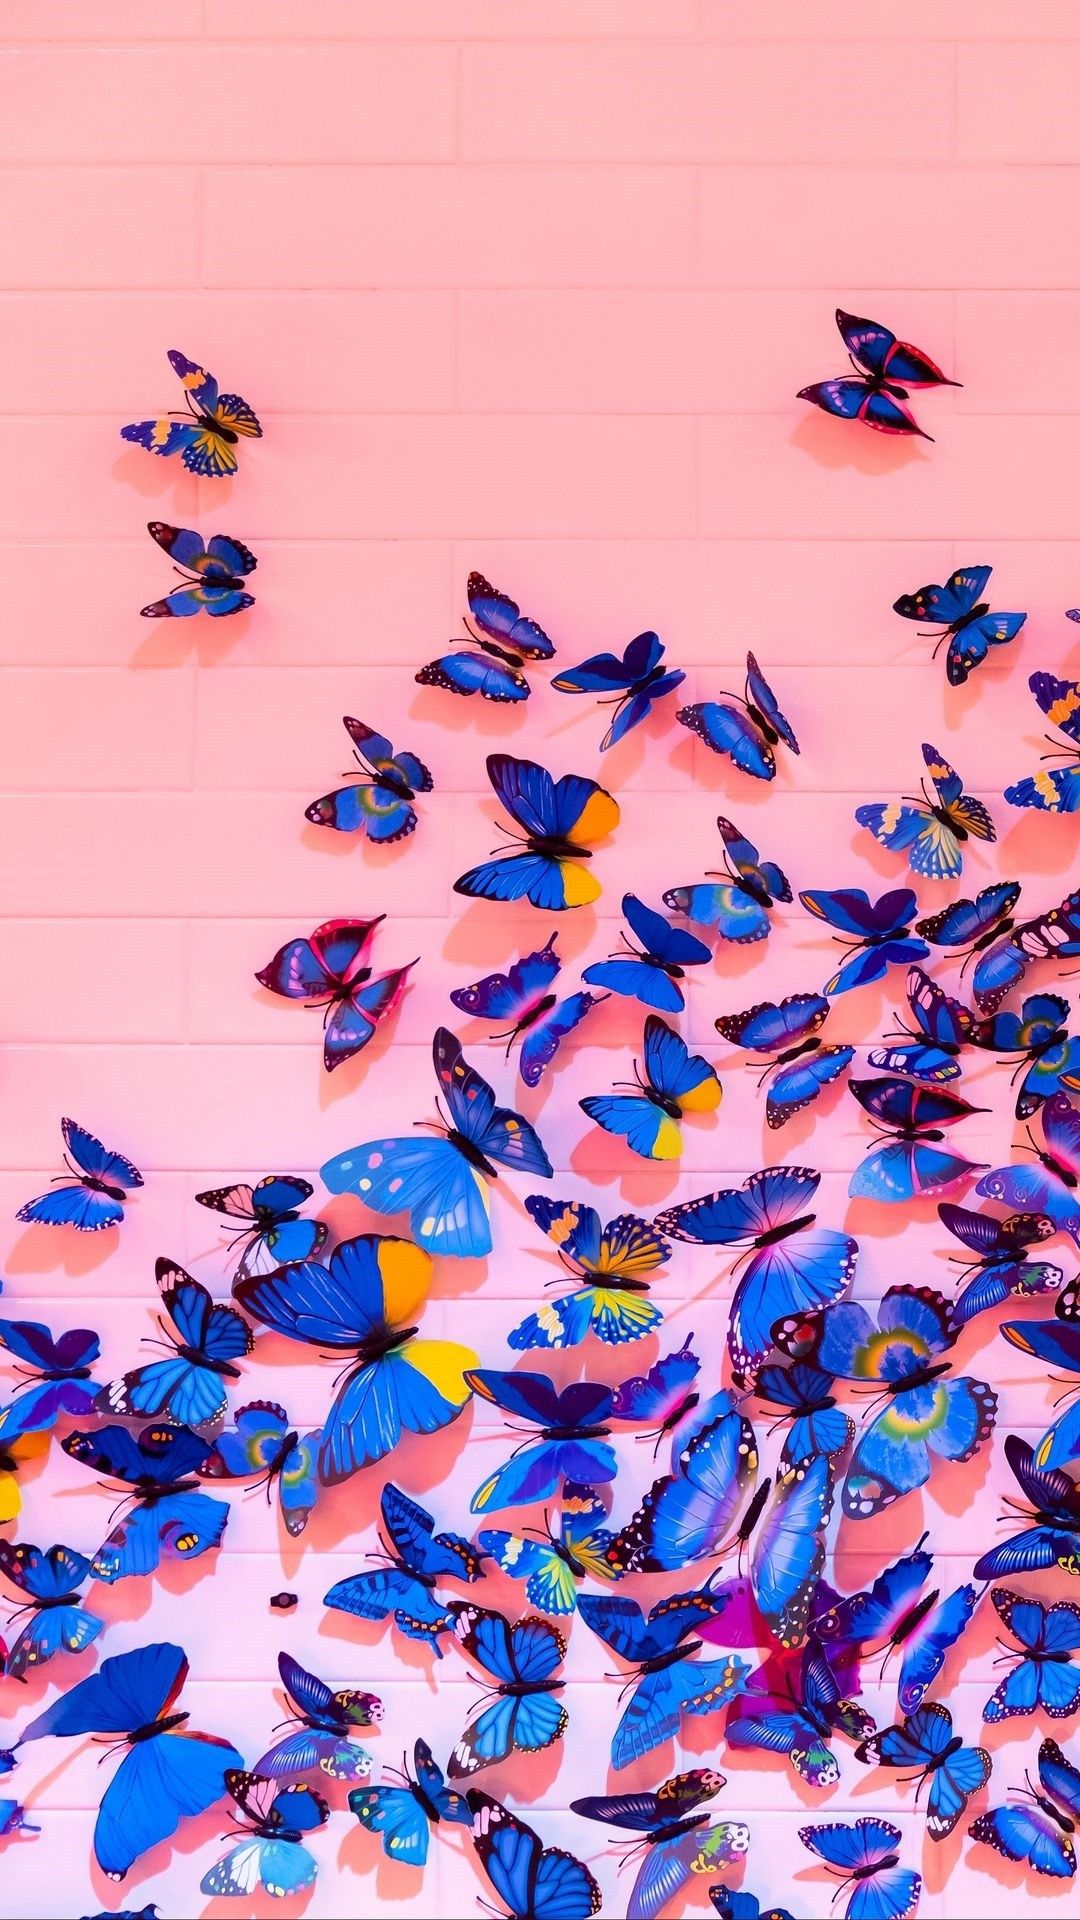 IPhone wallpaper of blue butterflies on a pink wall - Butterfly, bright, Mexico